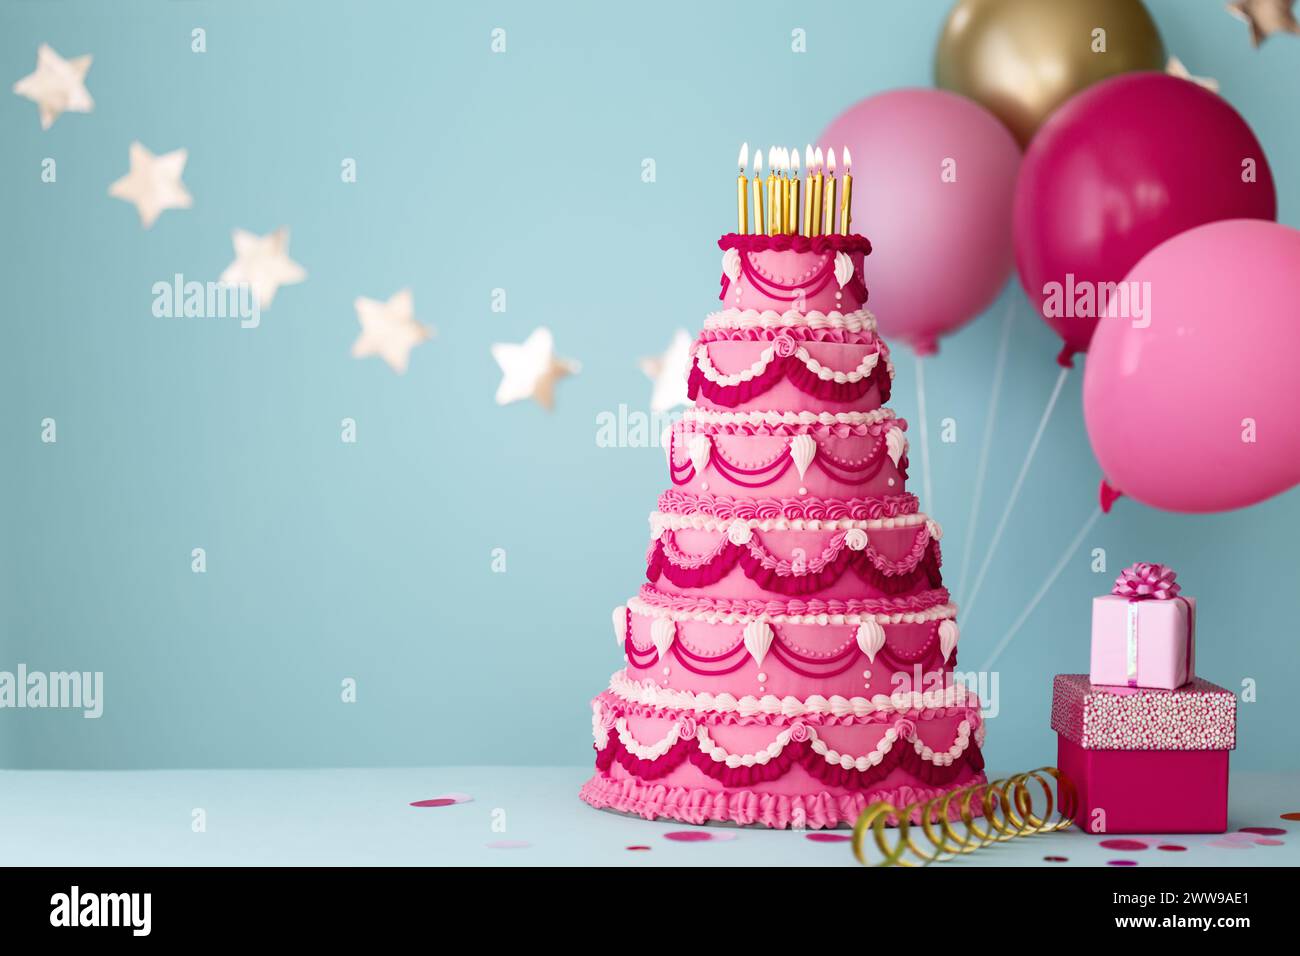 Elaborate pink tiered birthday cake with gifts and birthday balloons for a birthday party Stock Photo